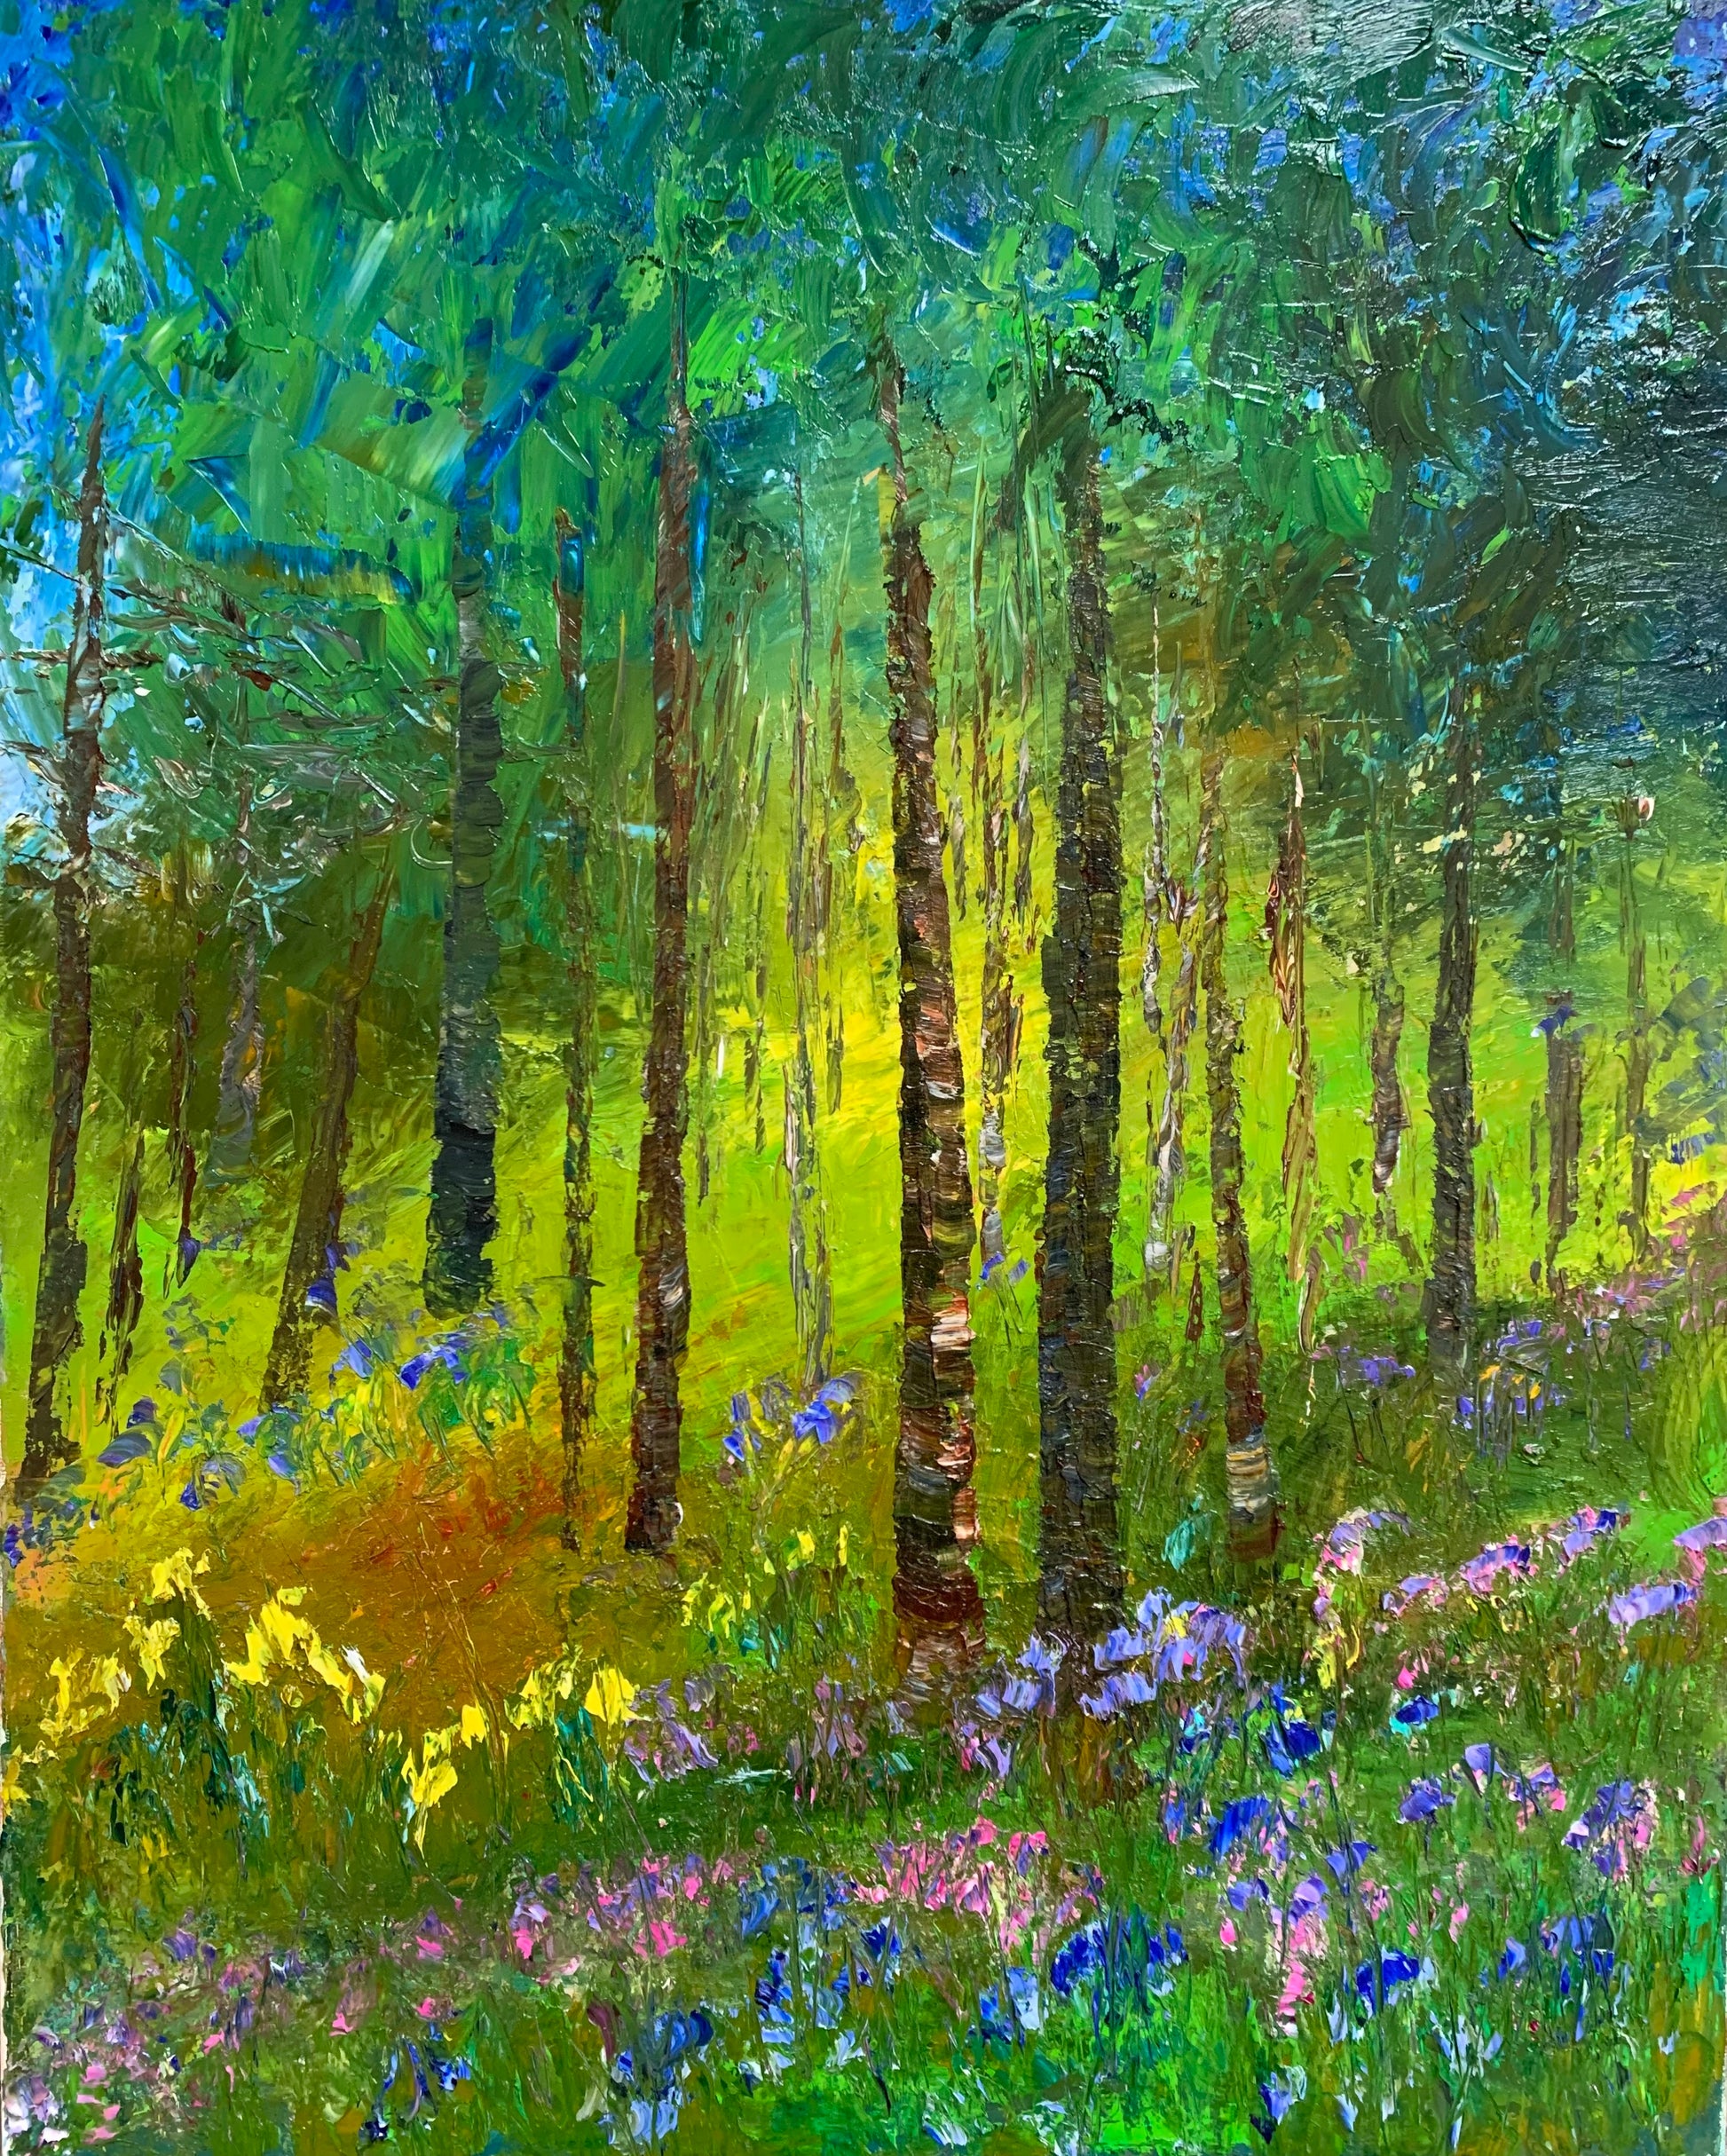 16" x 20" impressionist painting of a forest with light in the background and flowers in the foreground.